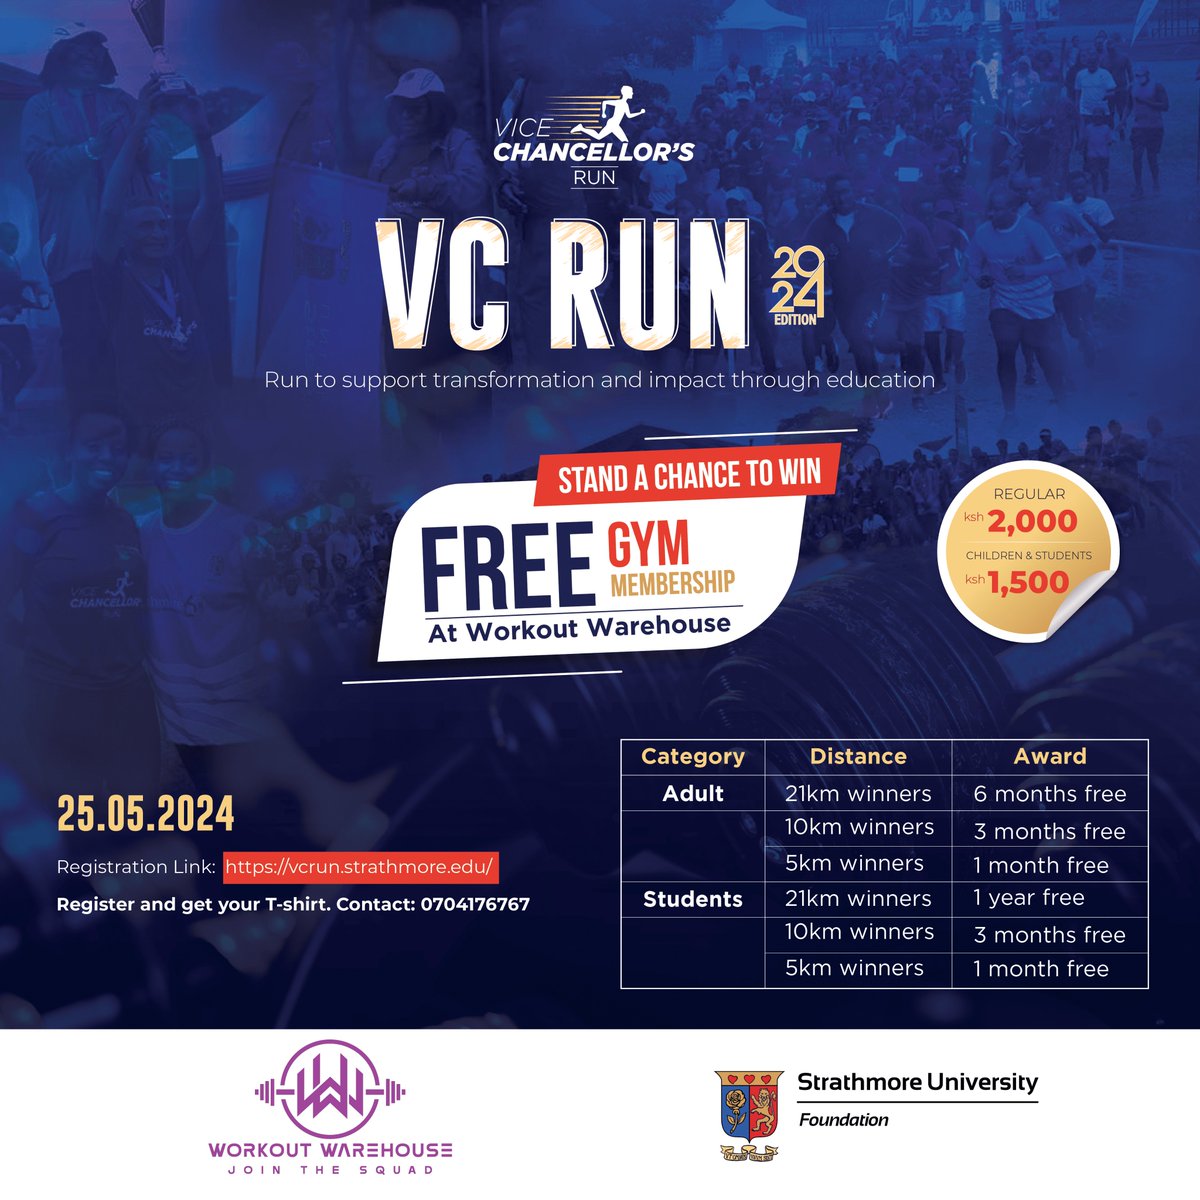 We know you're all pumped up for the #VCRun, and what better way to keep that energy going than with some gym perks? 💪 We've partnered with The Workout Warehouse to offer free gym memberships to the #VCRun 2024 winners.🎉 Register here: vcrun.strathmore.edu/register/